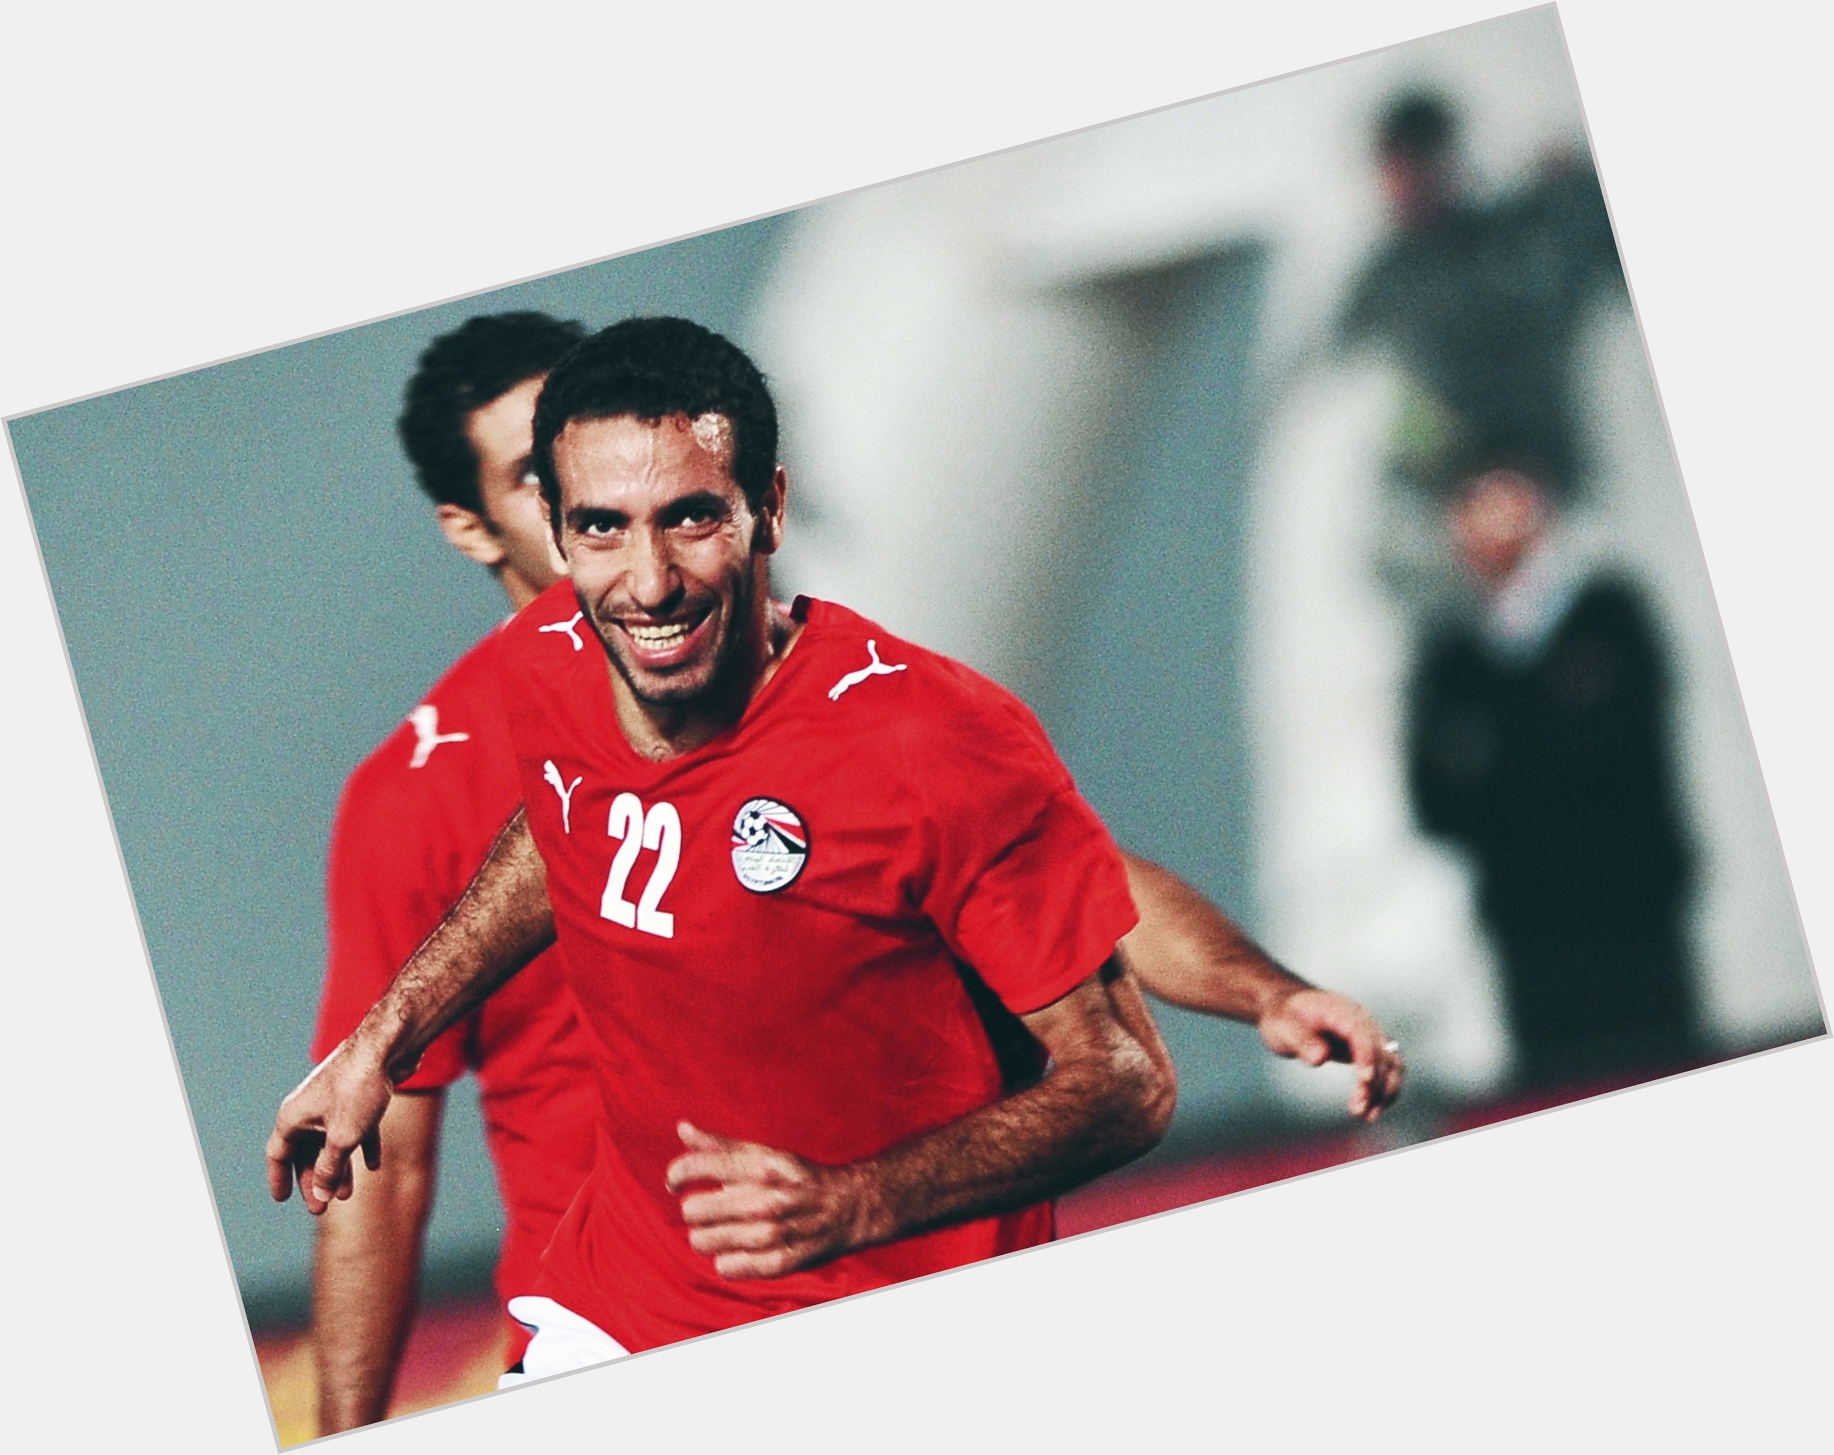 Https://fanpagepress.net/m/M/Mohamed Aboutrika Sexy 0